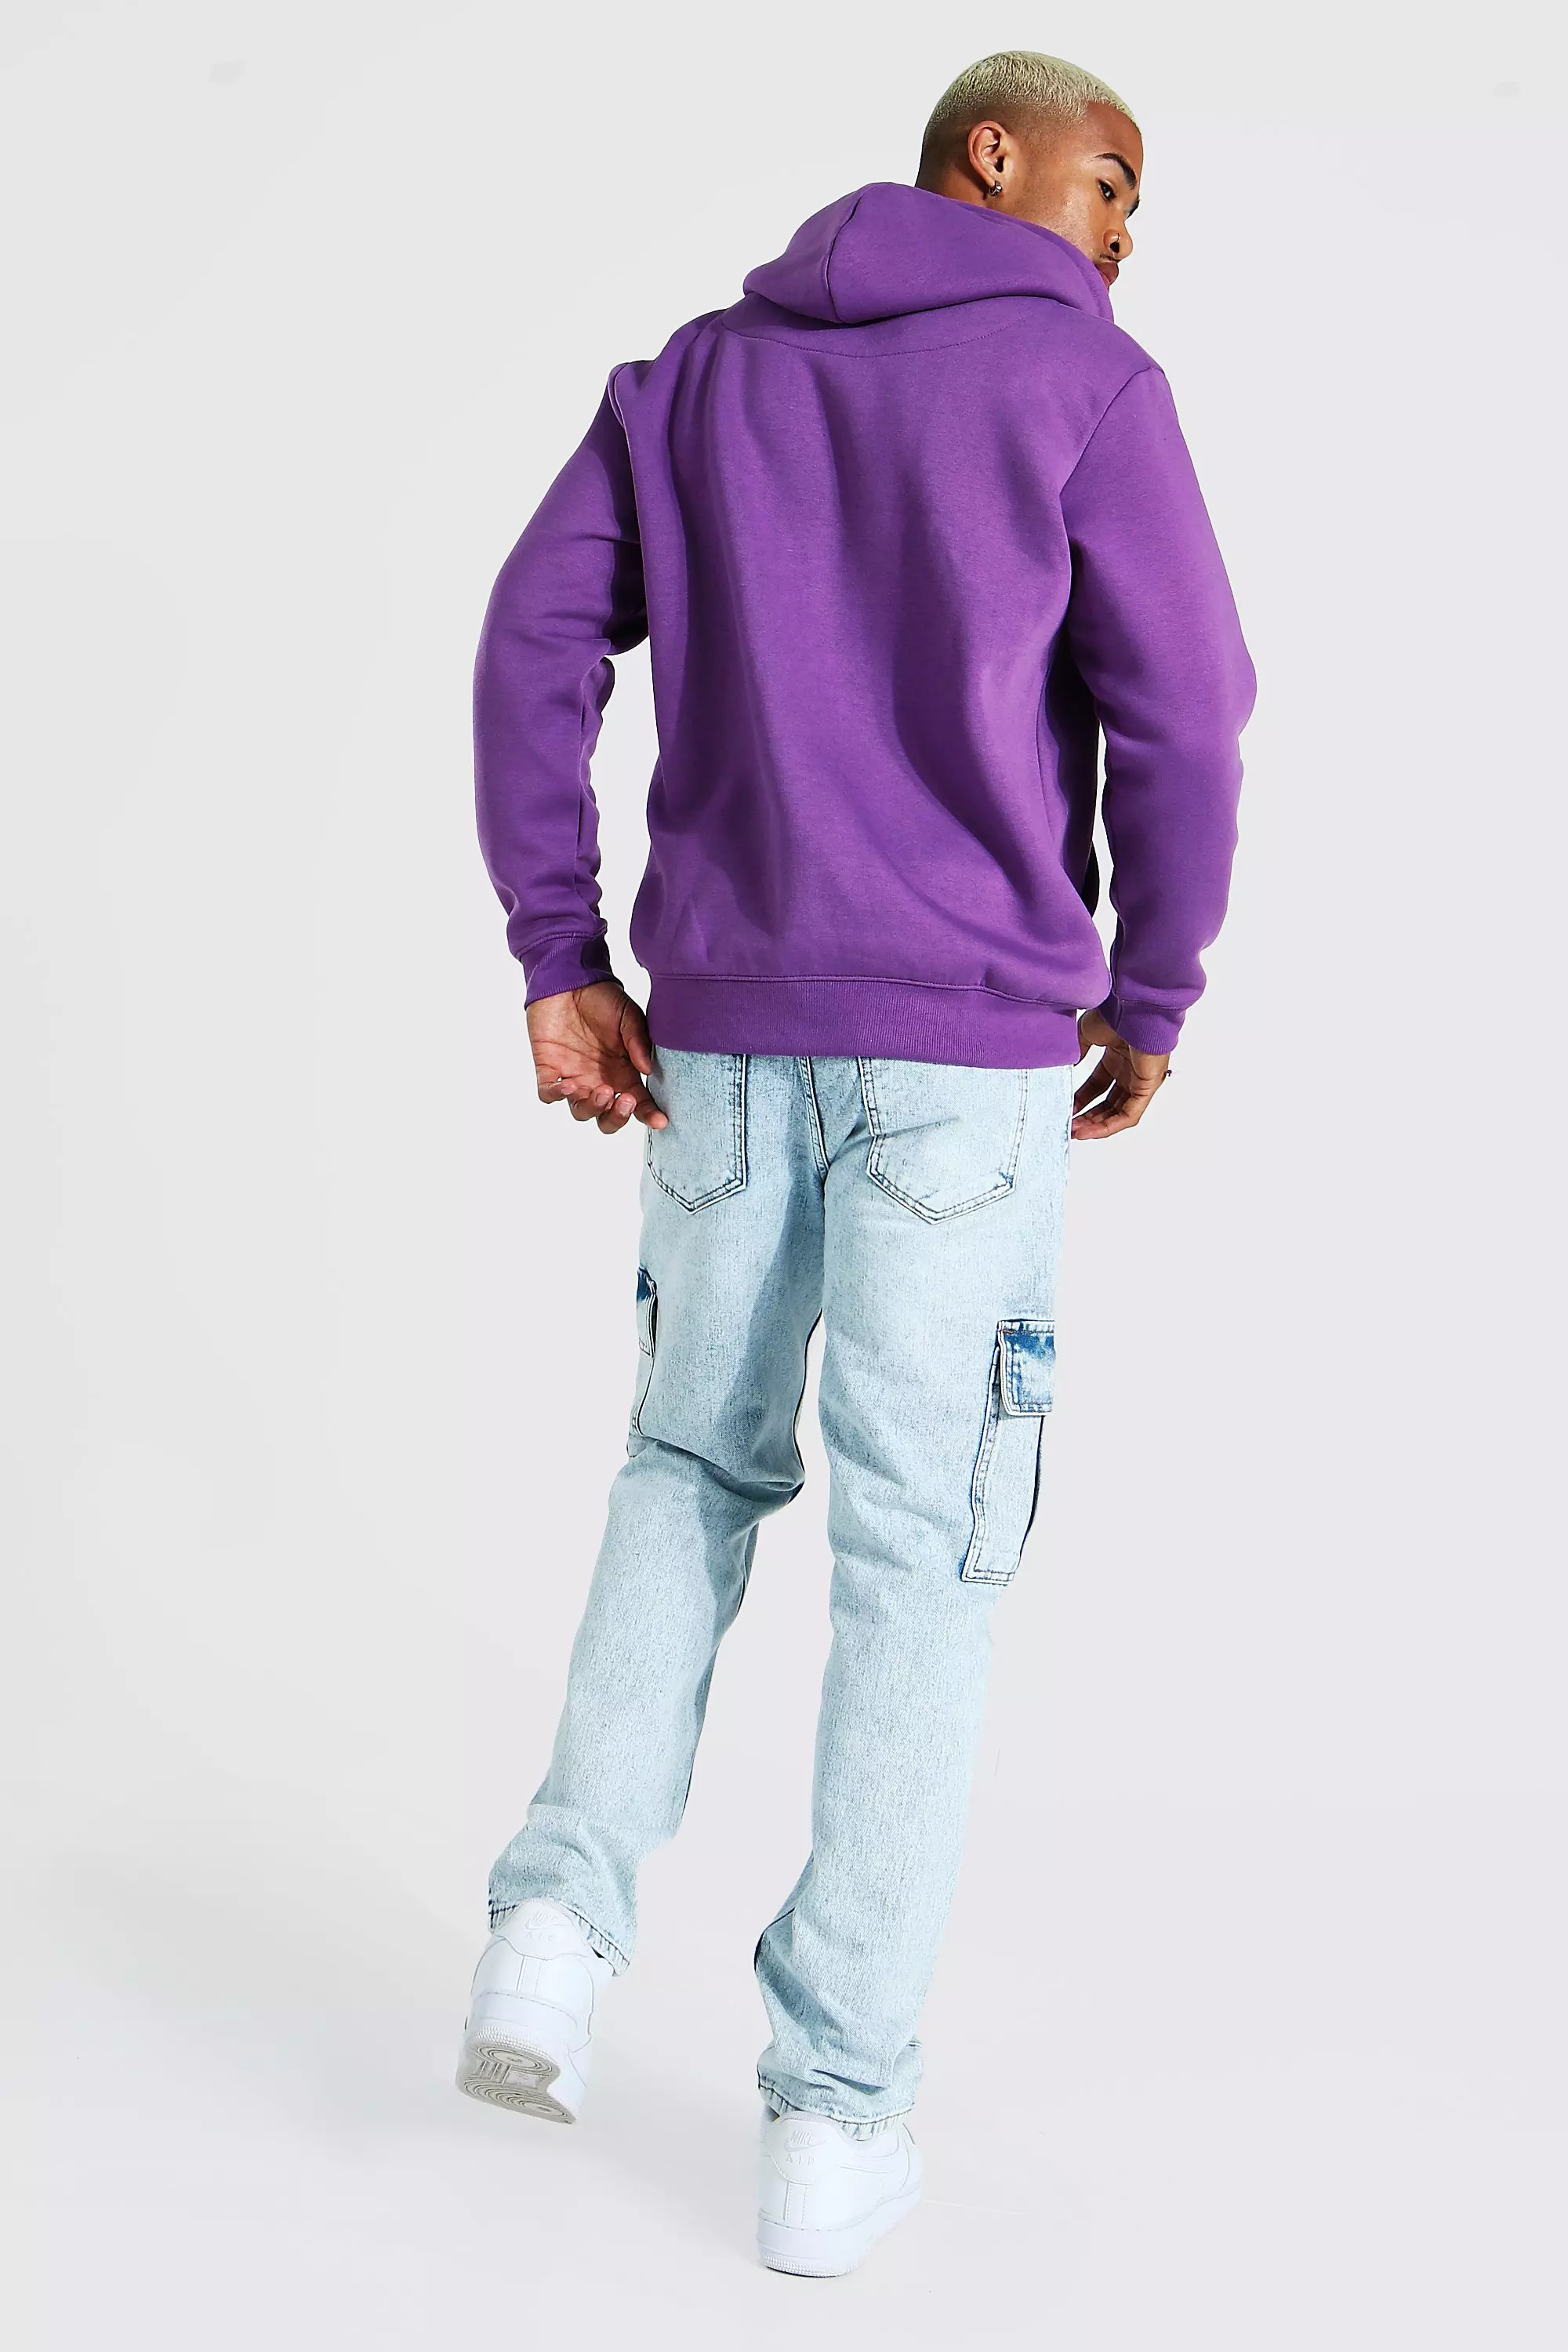 boohooMAN on X: purple rain. ☔ click the link to shop the fit